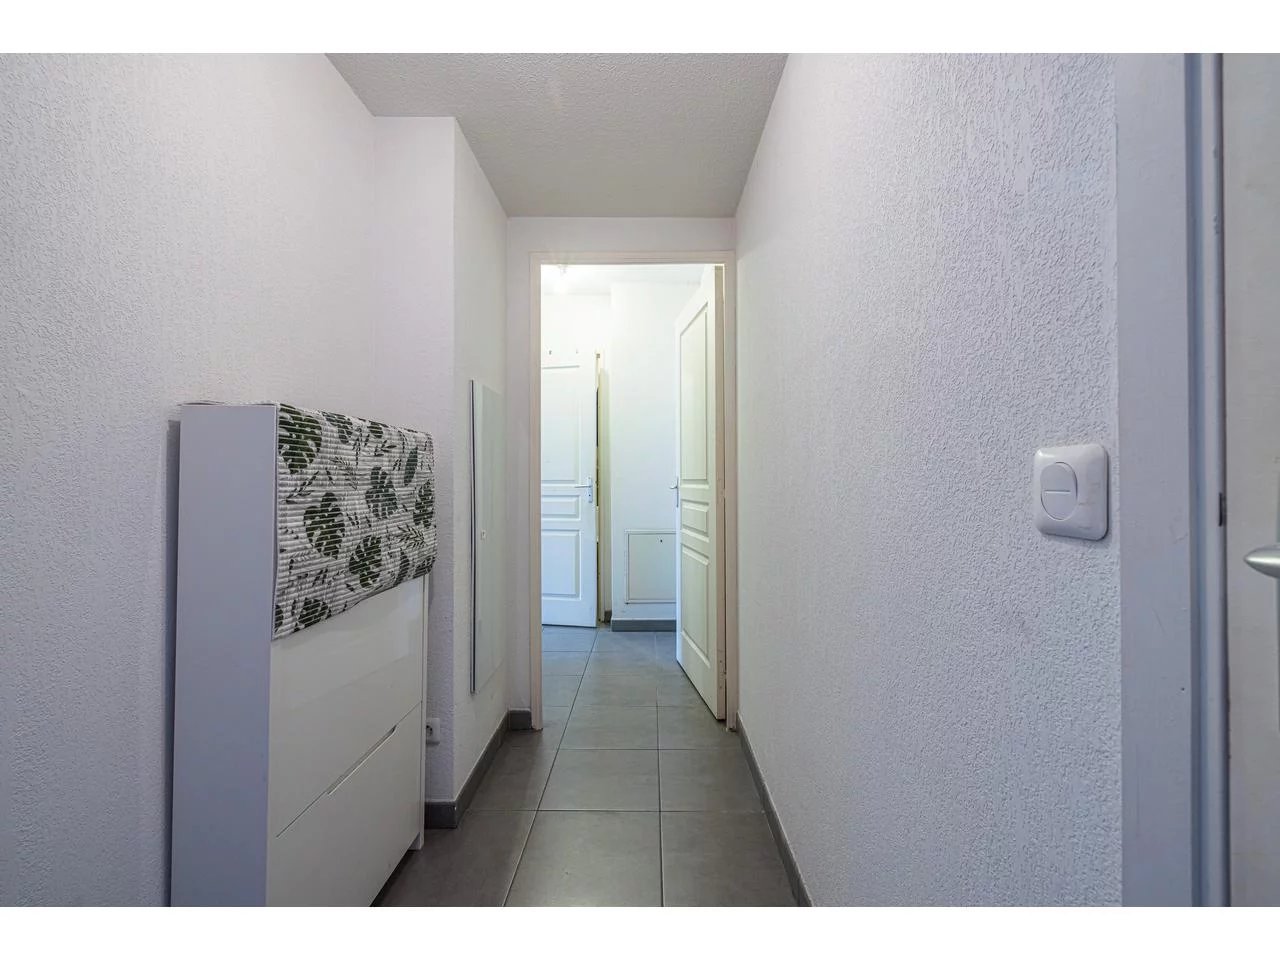 Appartement  2 Rooms 40m2  for sale   220 000 €